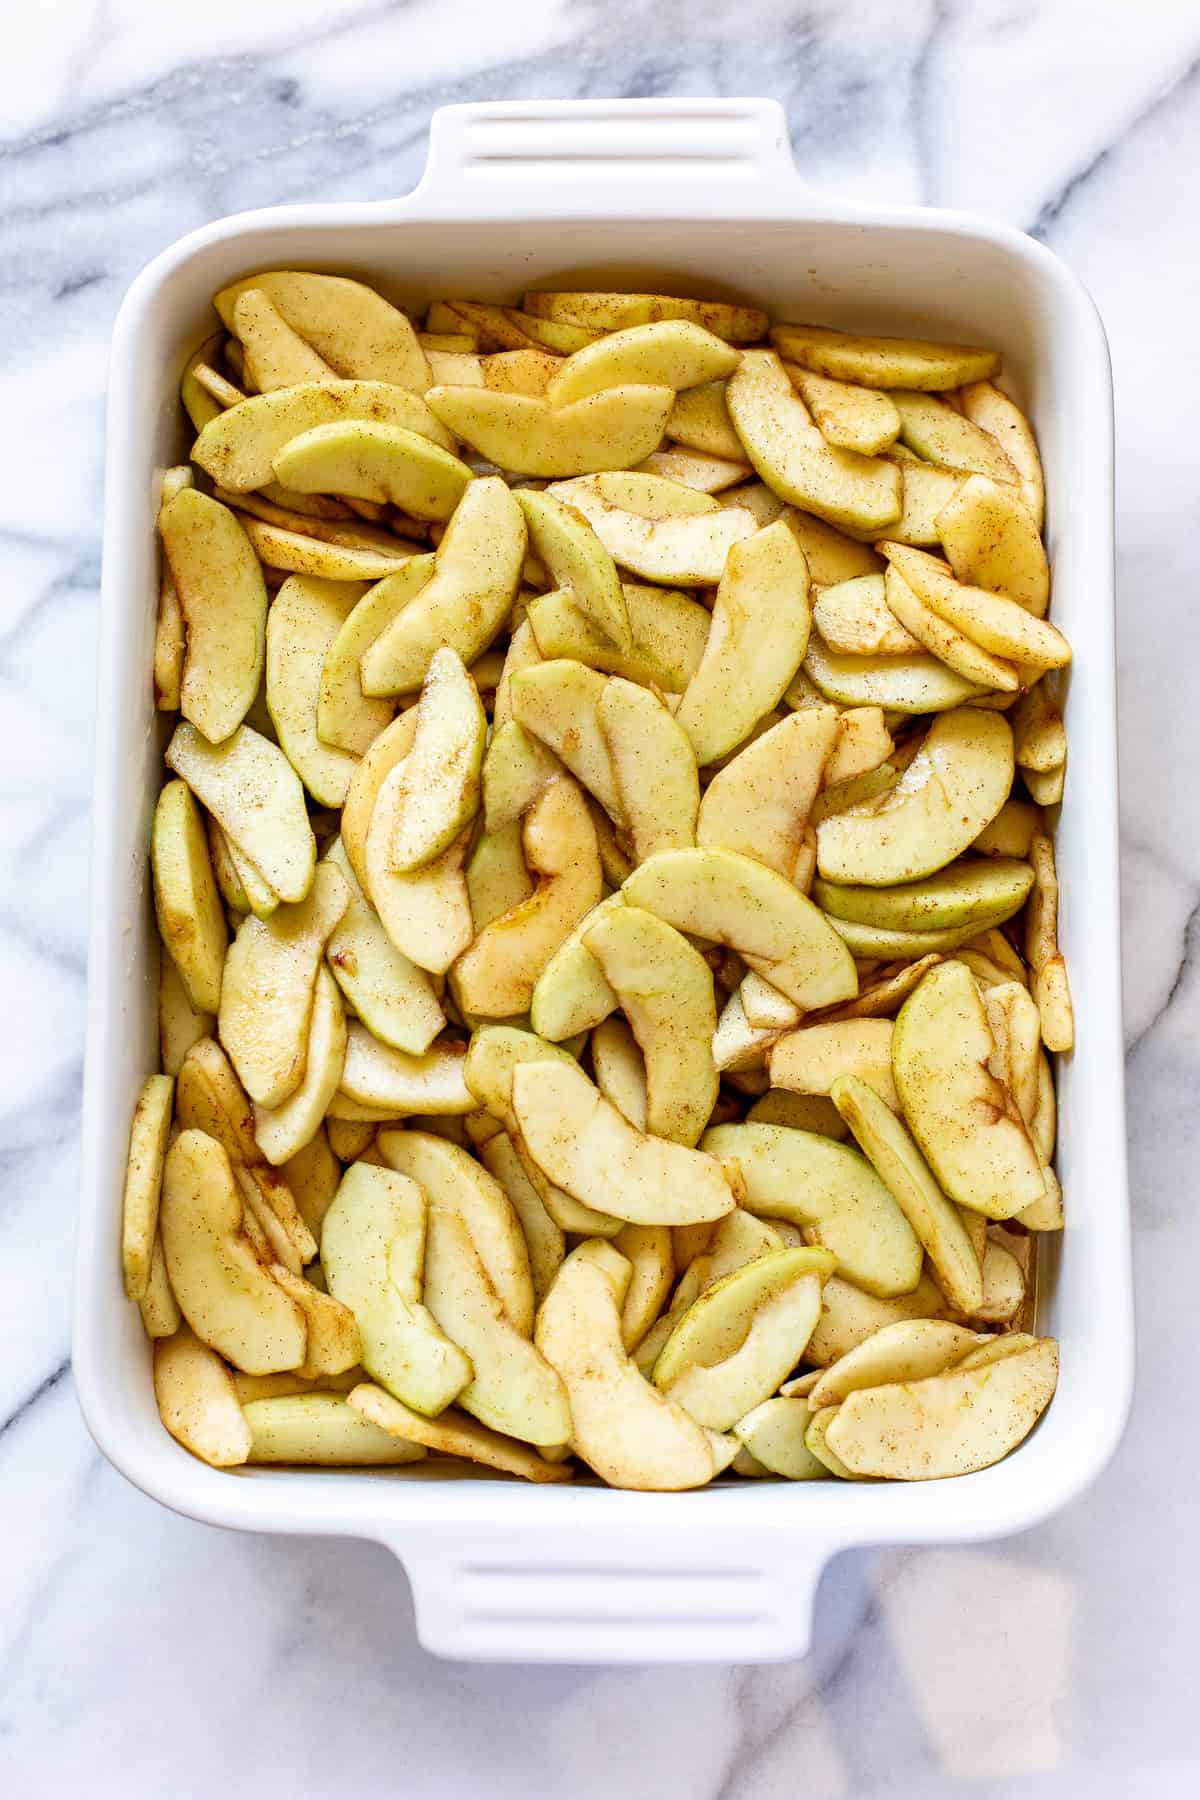 Sliced apples and sugar in a casserole dish